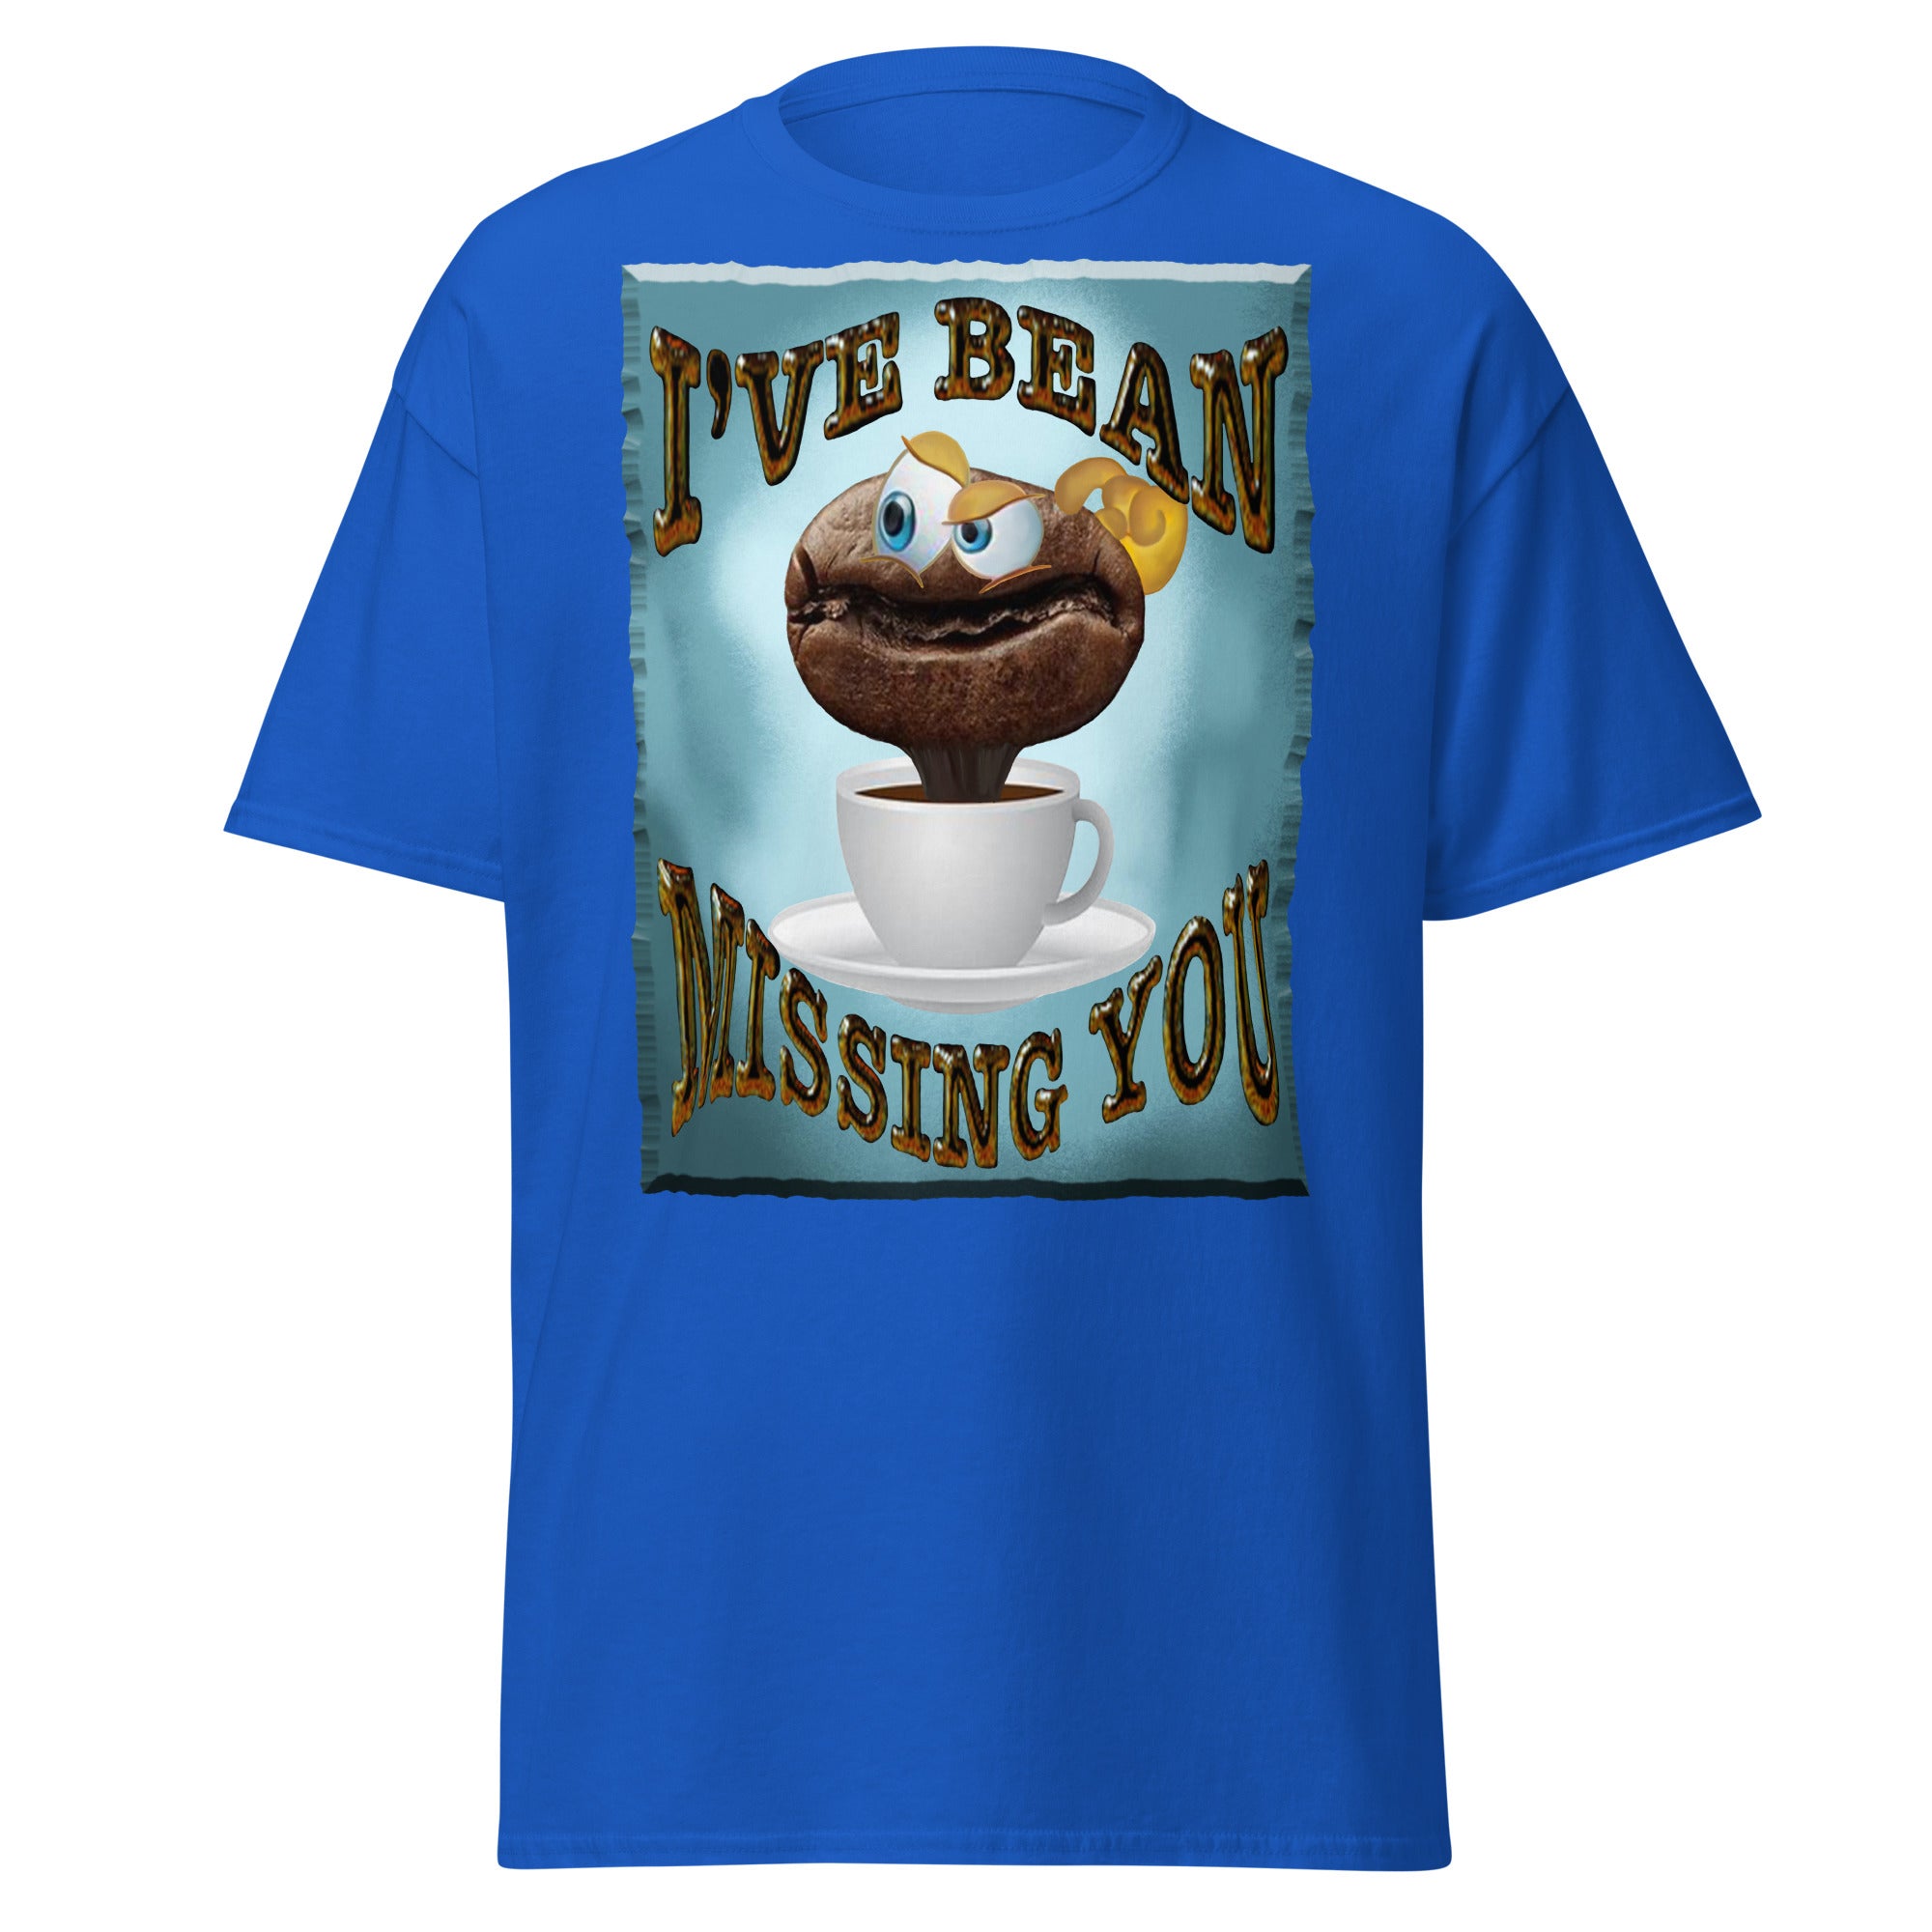 COFFEE HUMOR  -I'VE BEAN  -MISSING YOU